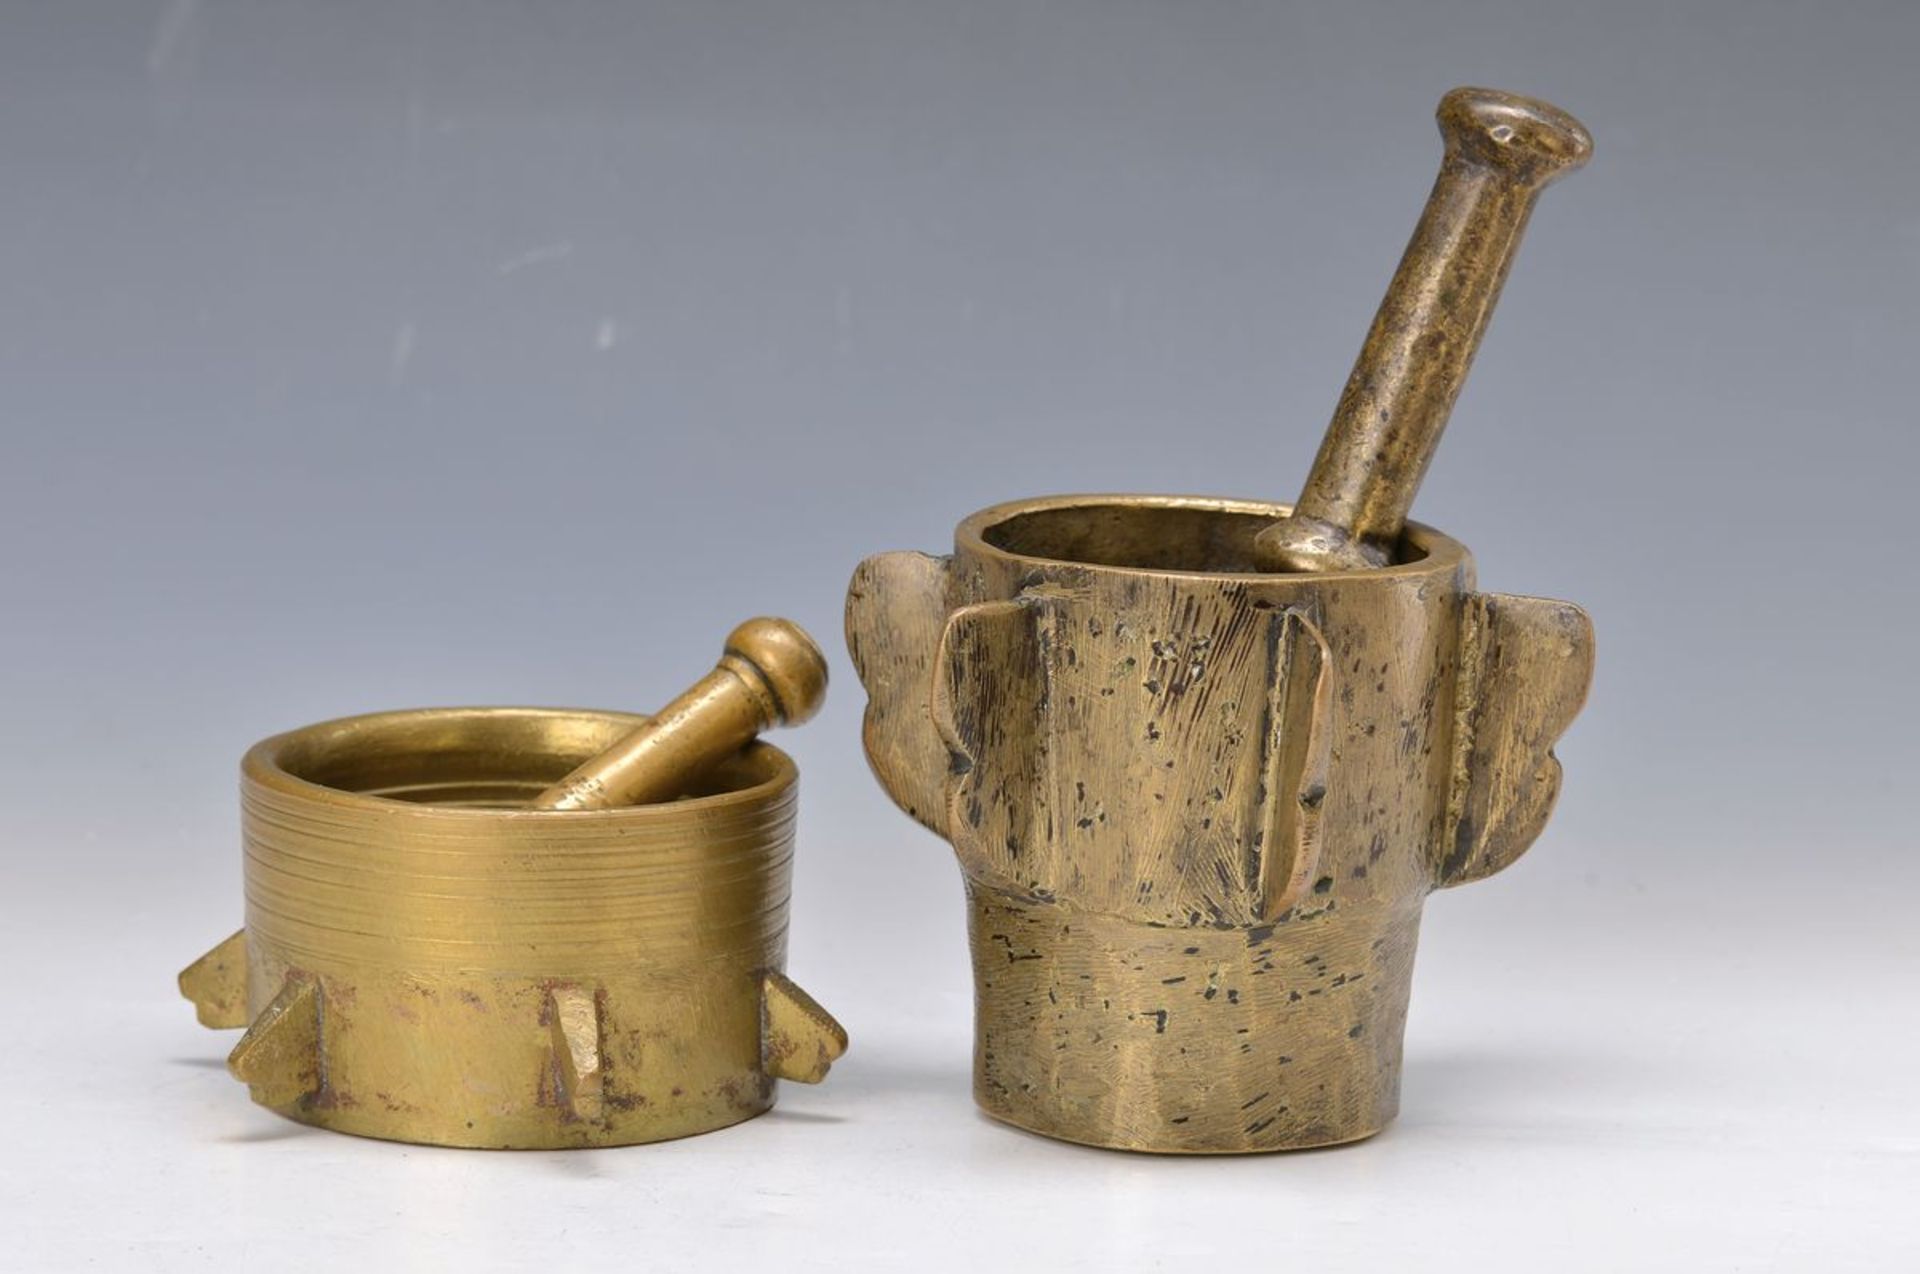 2 Mortars with pestles, Spain, 19th c., massive brass cast, one pestle damaged, H. approx. 7